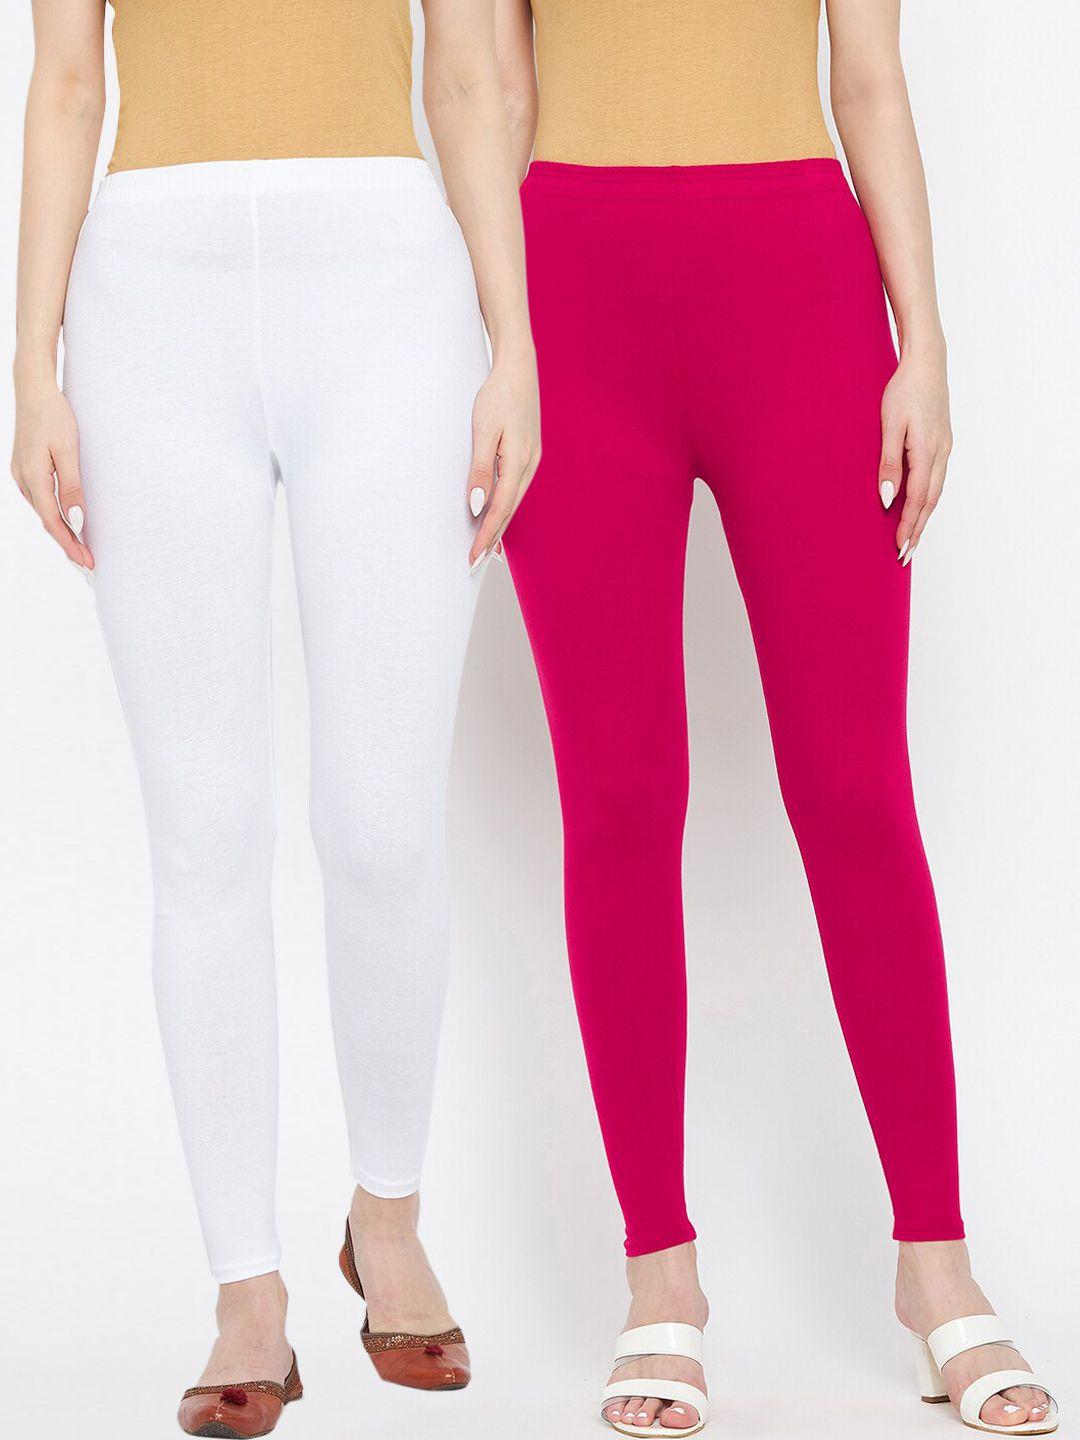 clora creation pack of 2 magenta & off-white solid ankle length leggings